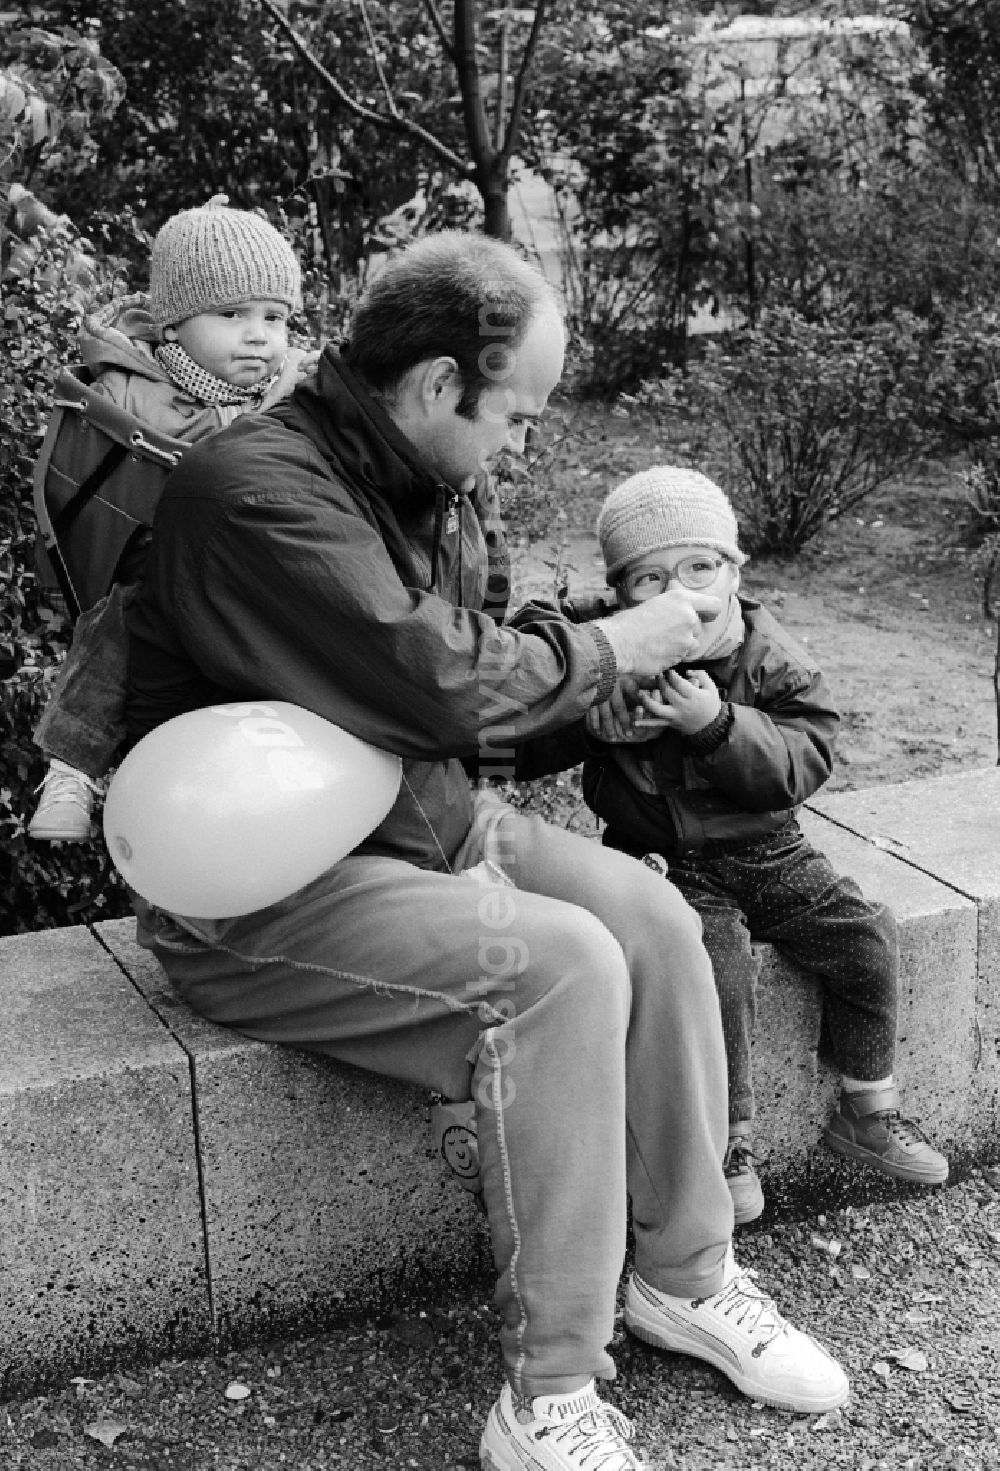 GDR picture archive: Berlin - Father with two children in Berlin, the former capital of the GDR, German Democratic Republic